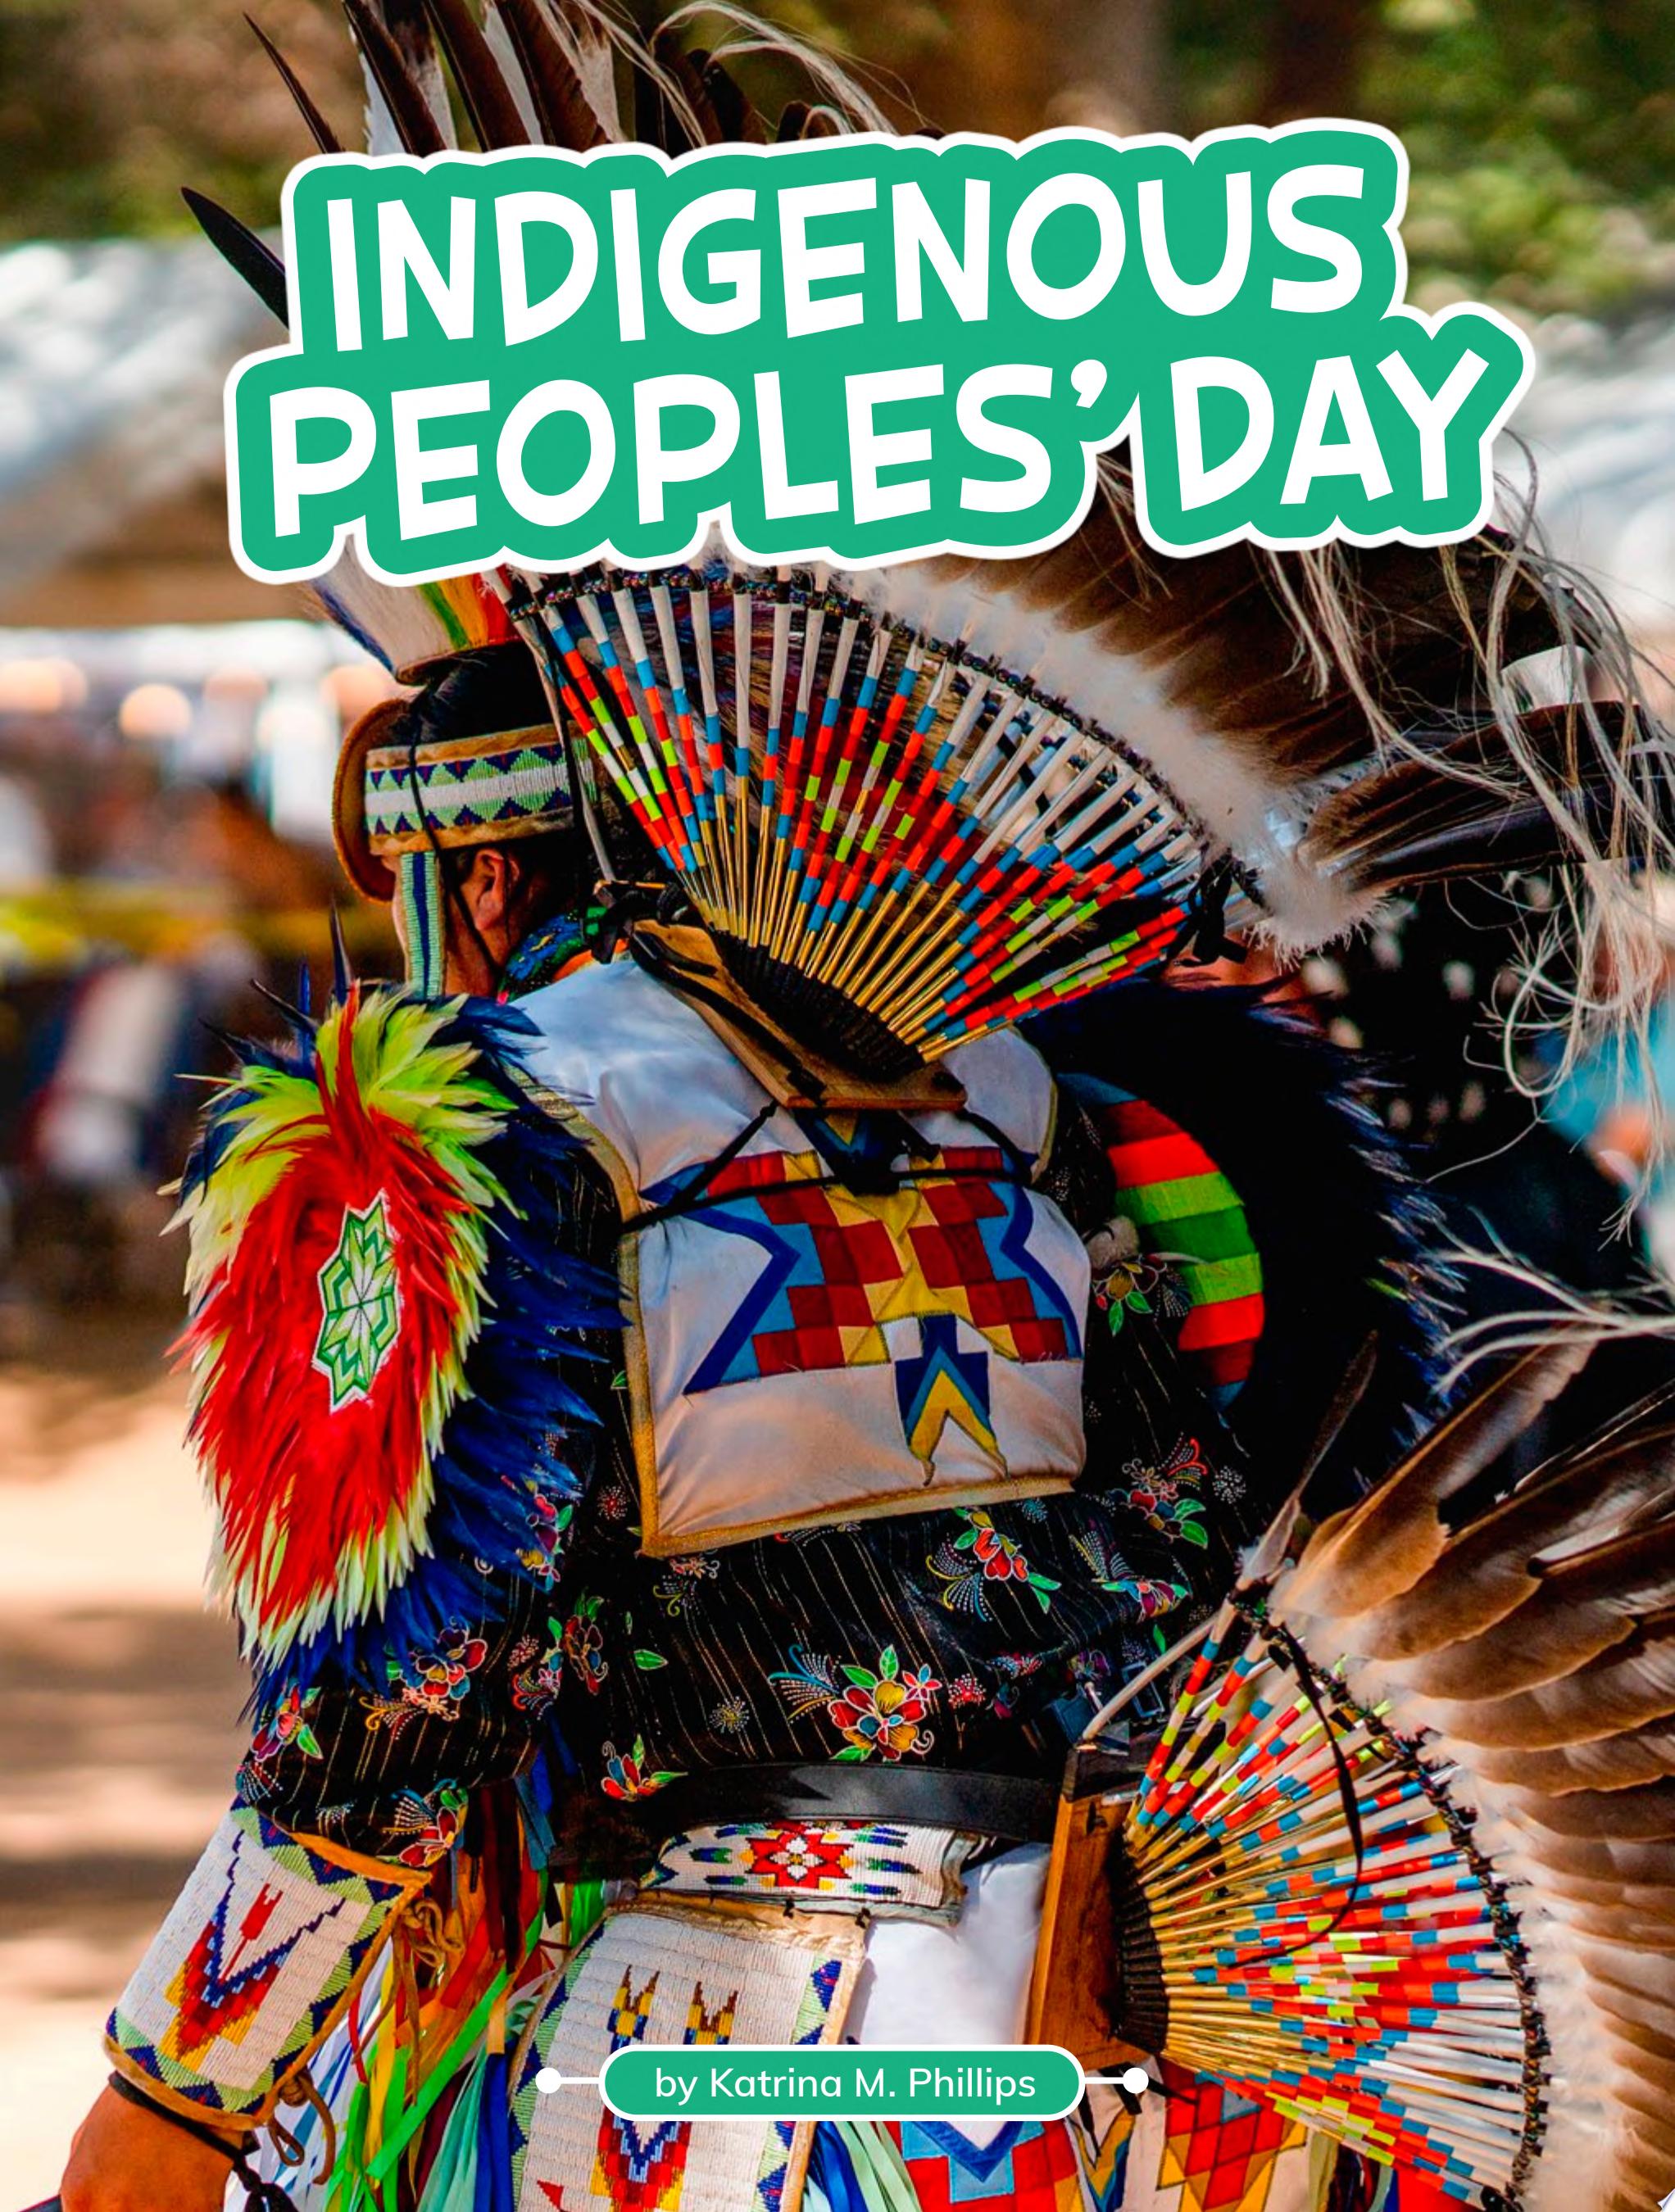 Image for "Indigenous Peoples' Day"